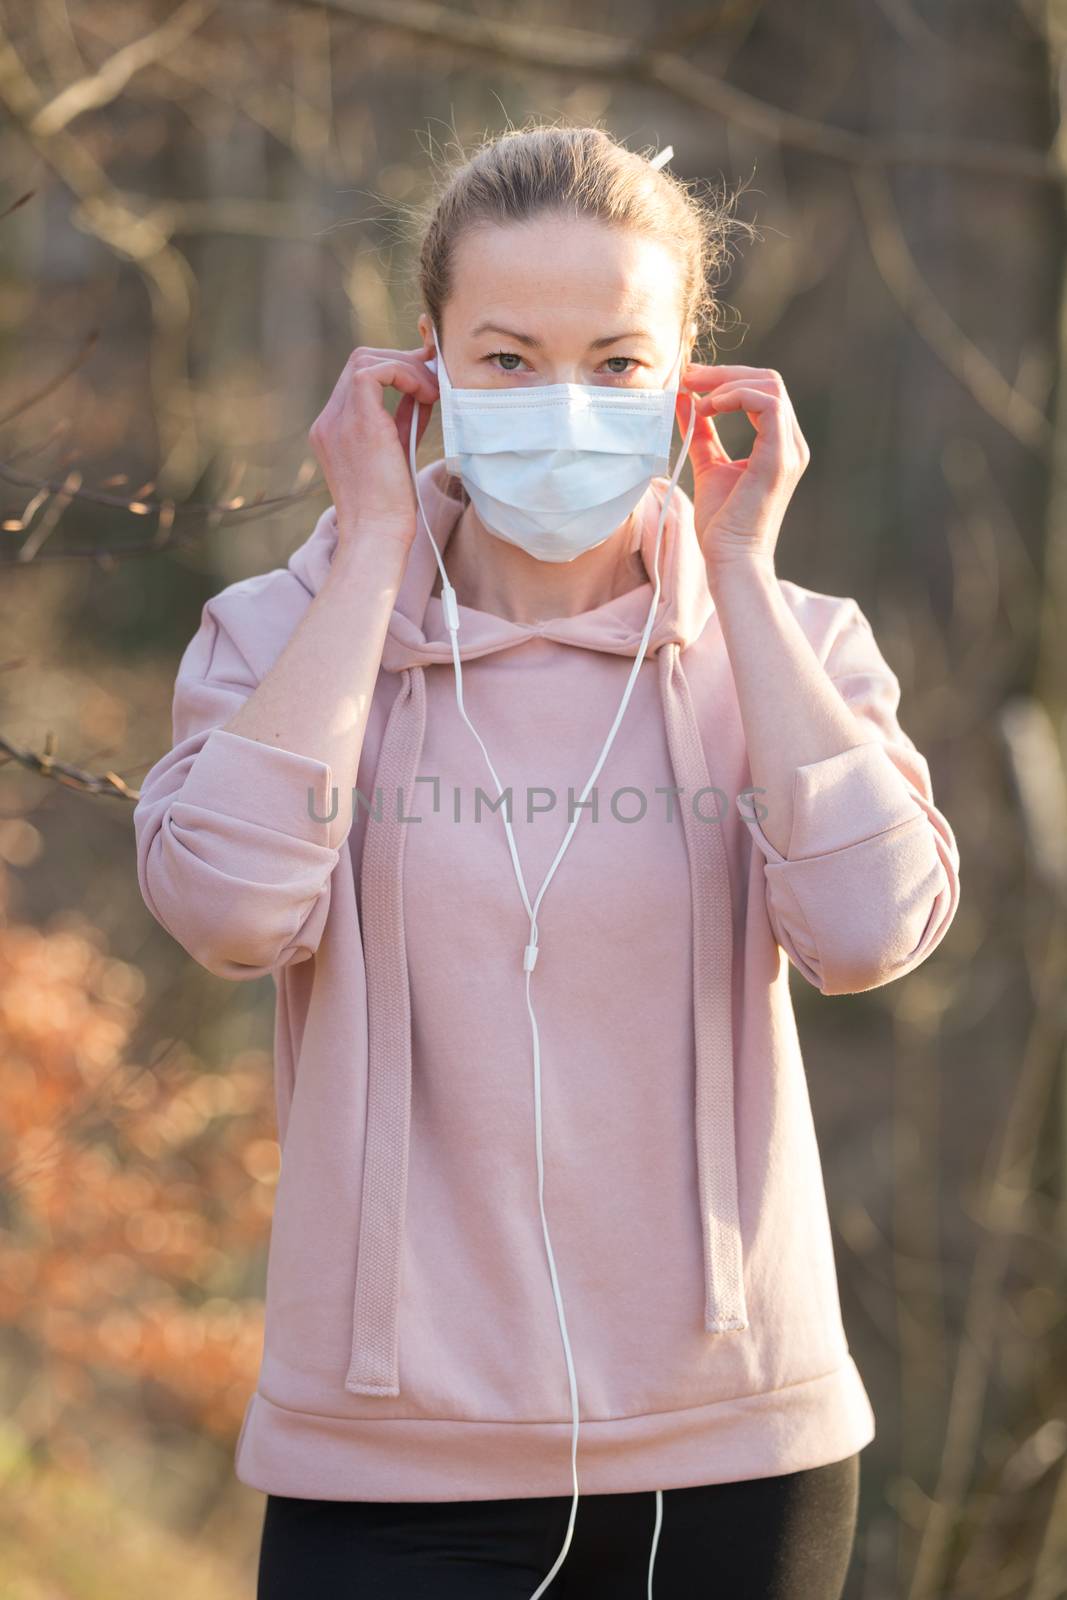 Portrait of caucasian sporty woman wearing medical protection face mask while walking in park, relaxing and listening to music. Corona virus, or Covid-19, is spreading all over the world.